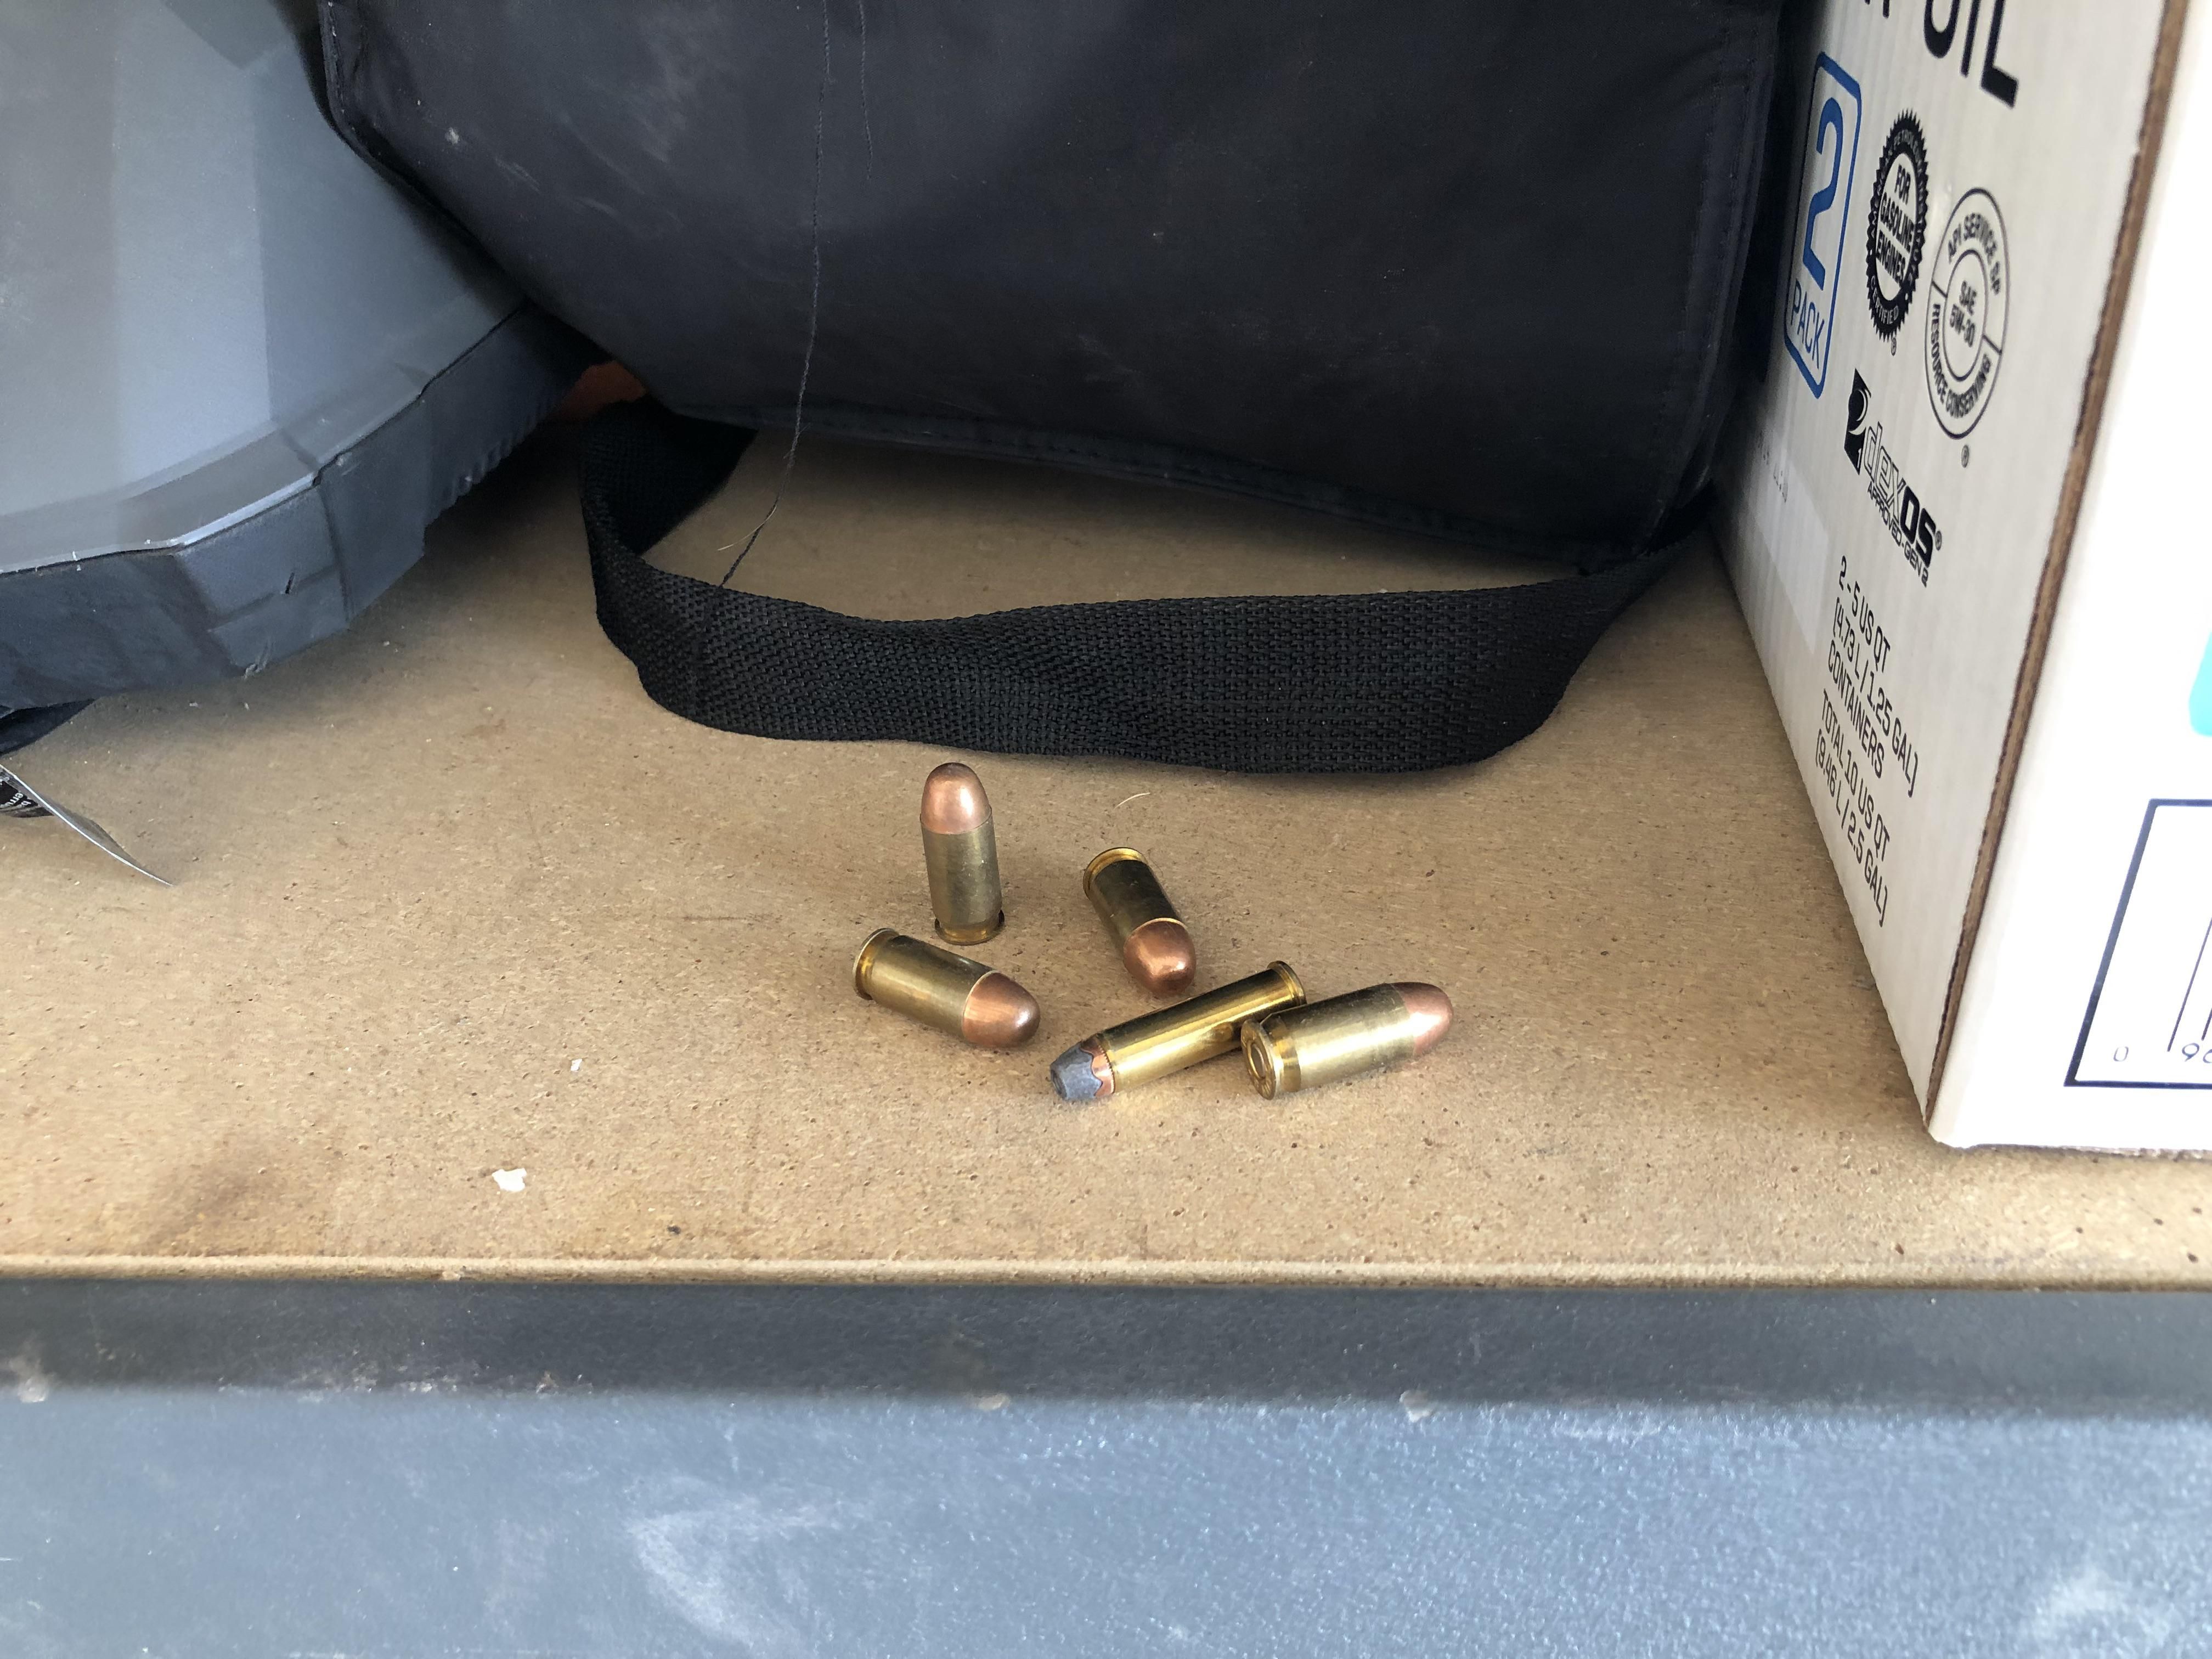 Lucky Me! I was cleaning my garage and found $100.00 dollars worth of ammo.